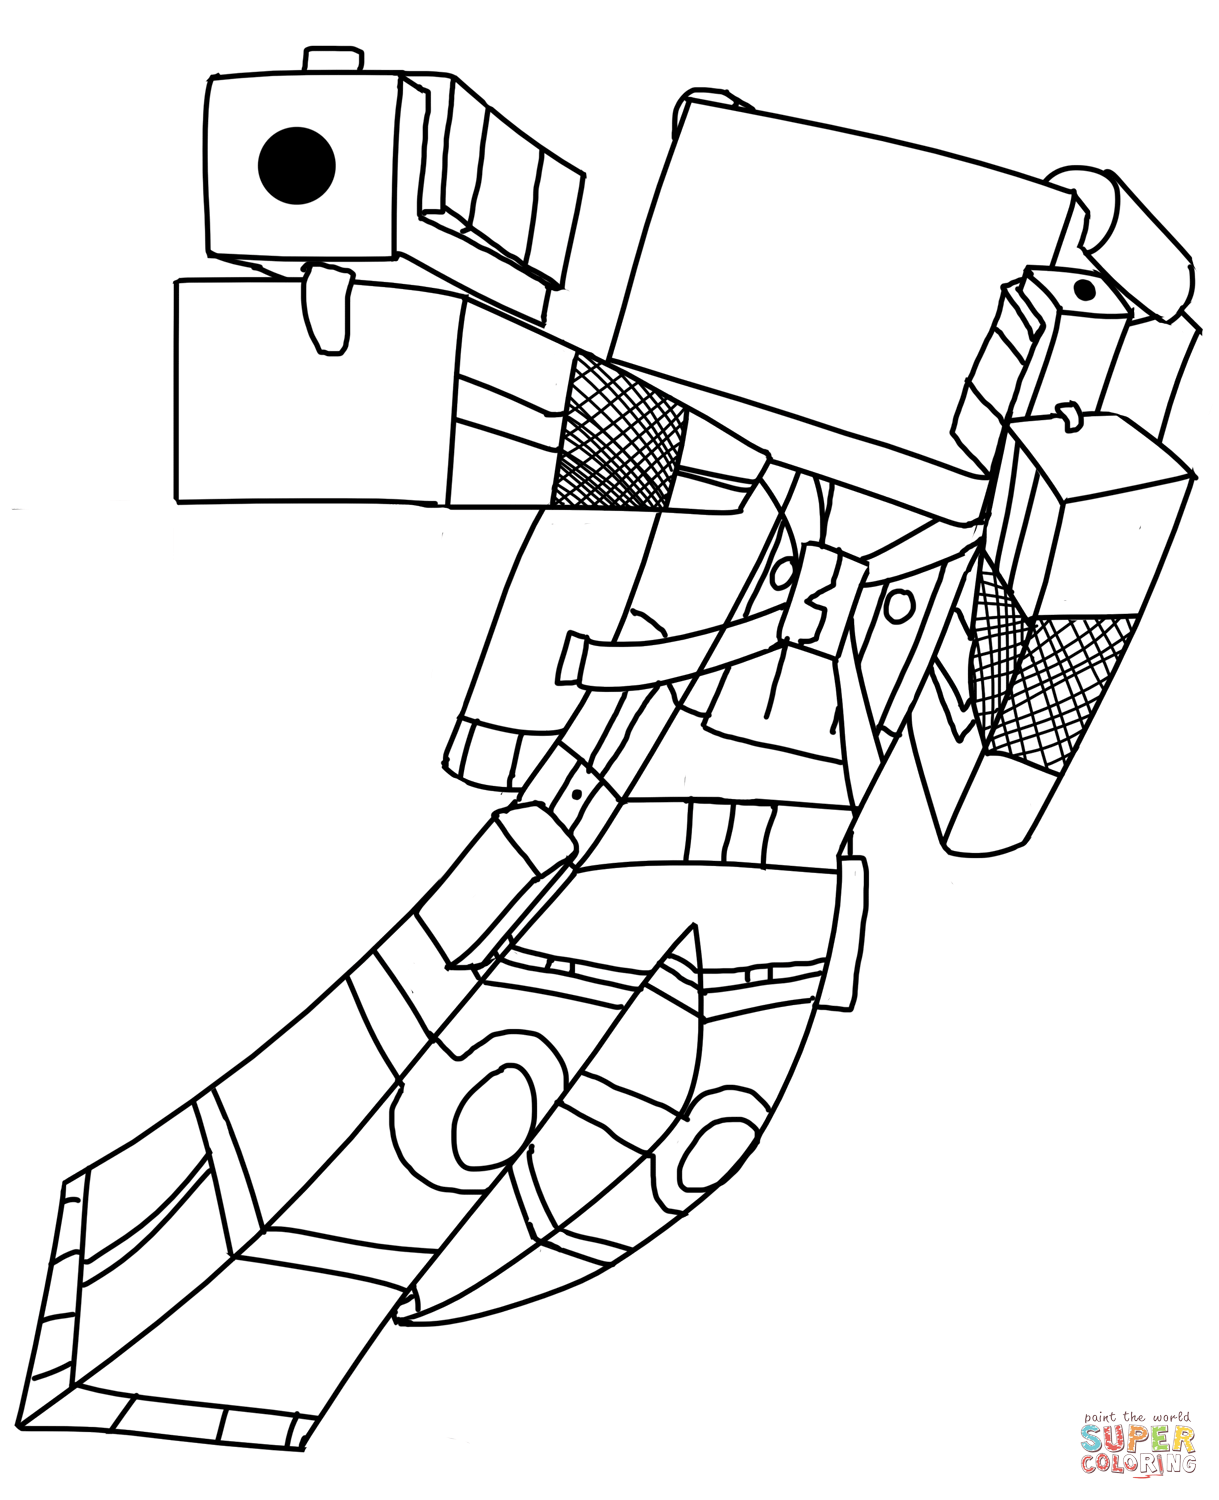 Minecraft coloring pages | Free Coloring Pages